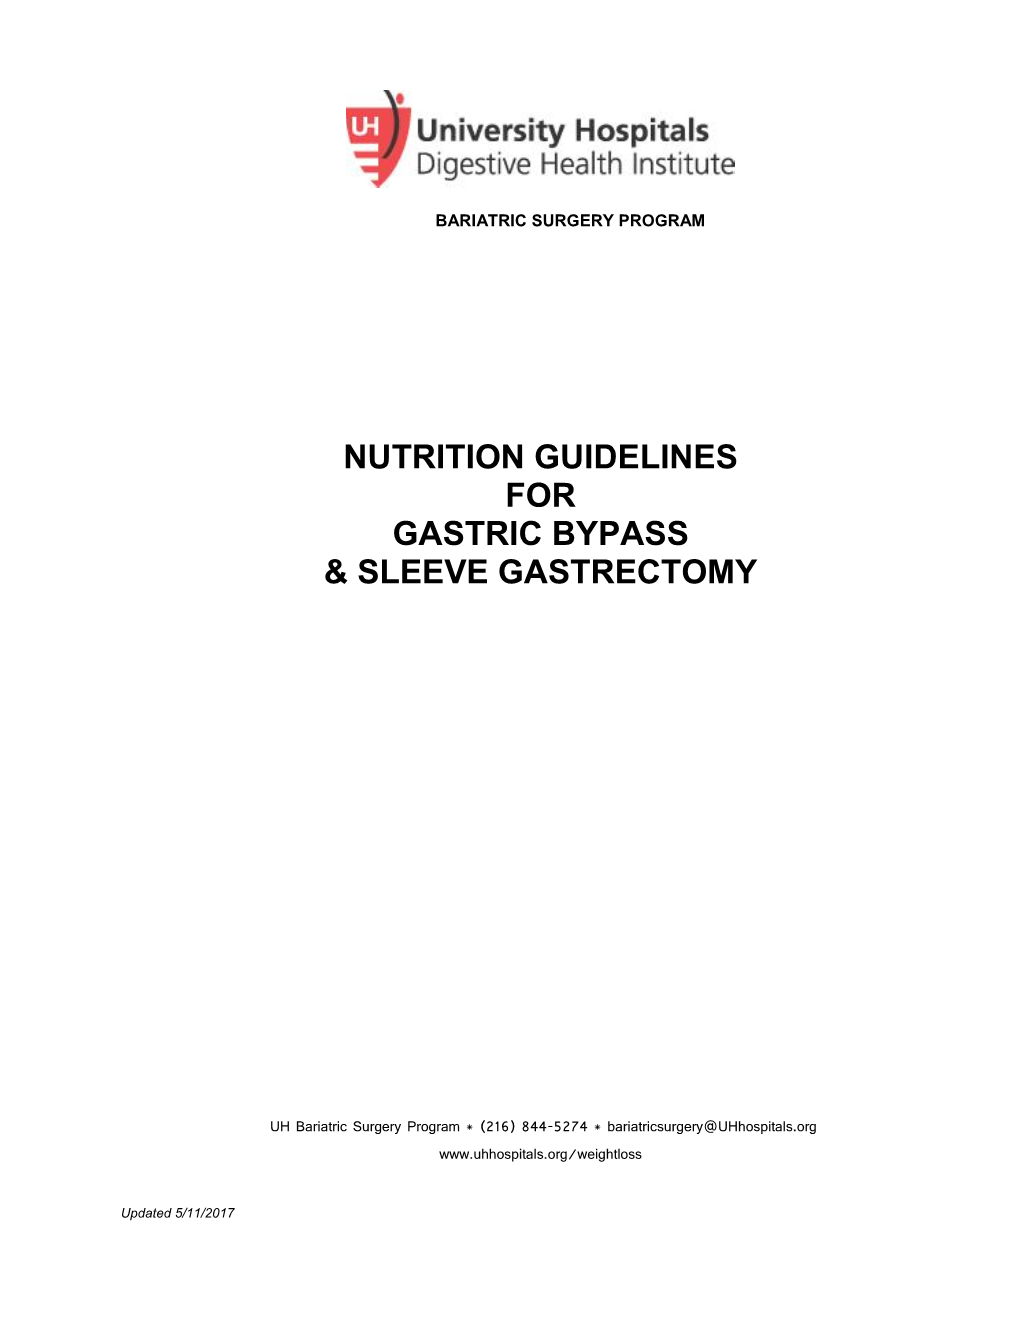 Nutrition Guidelines for Gastric Bypass & Sleeve Gastrectomy